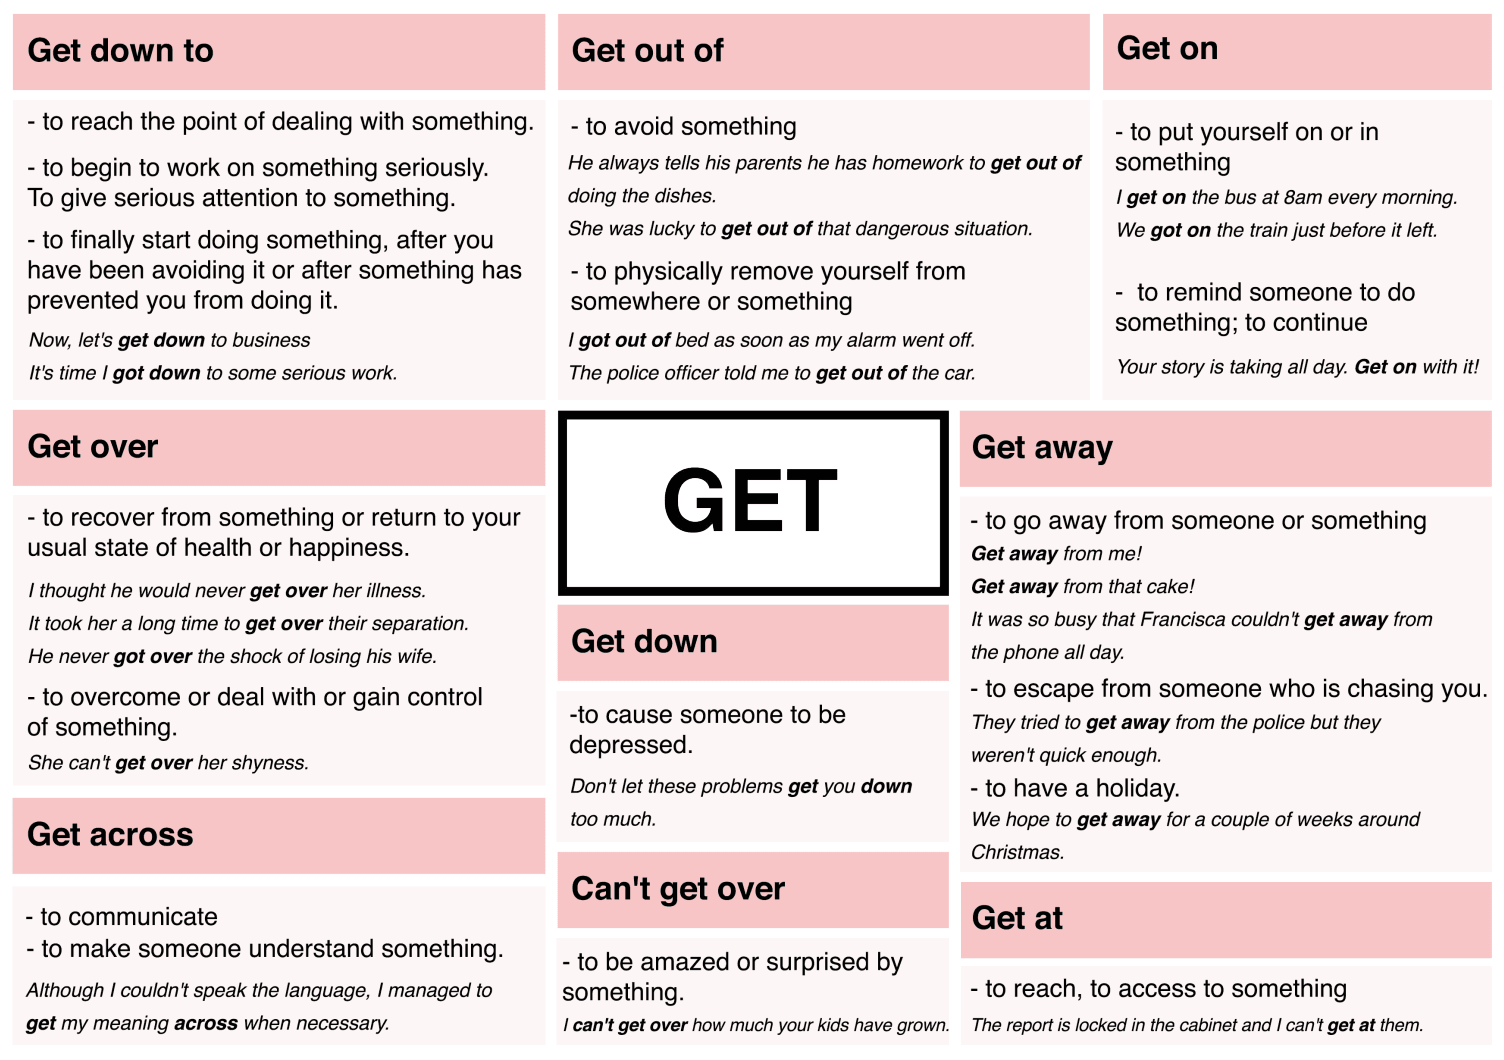 Phrasal Verbs With Get